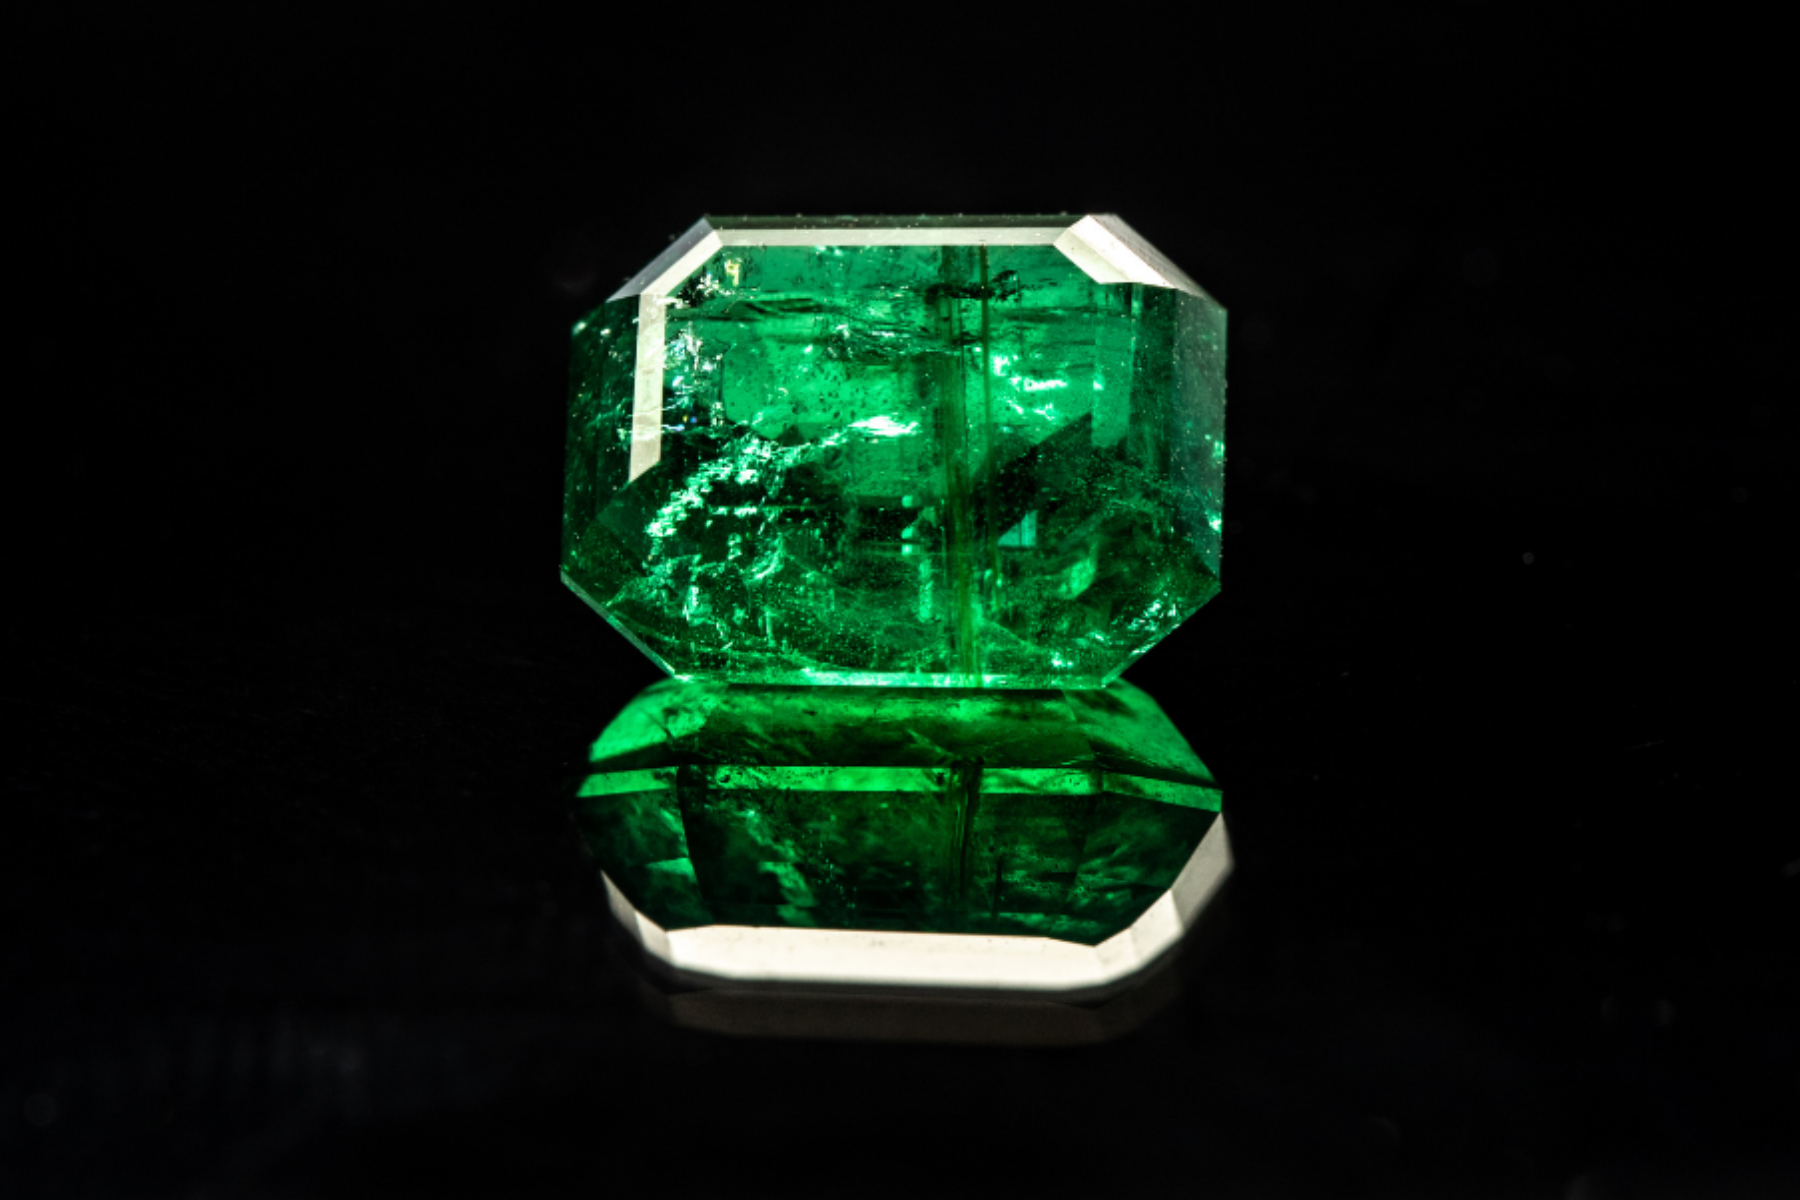 The image depicts an octagonal-cut emerald set against a dark background